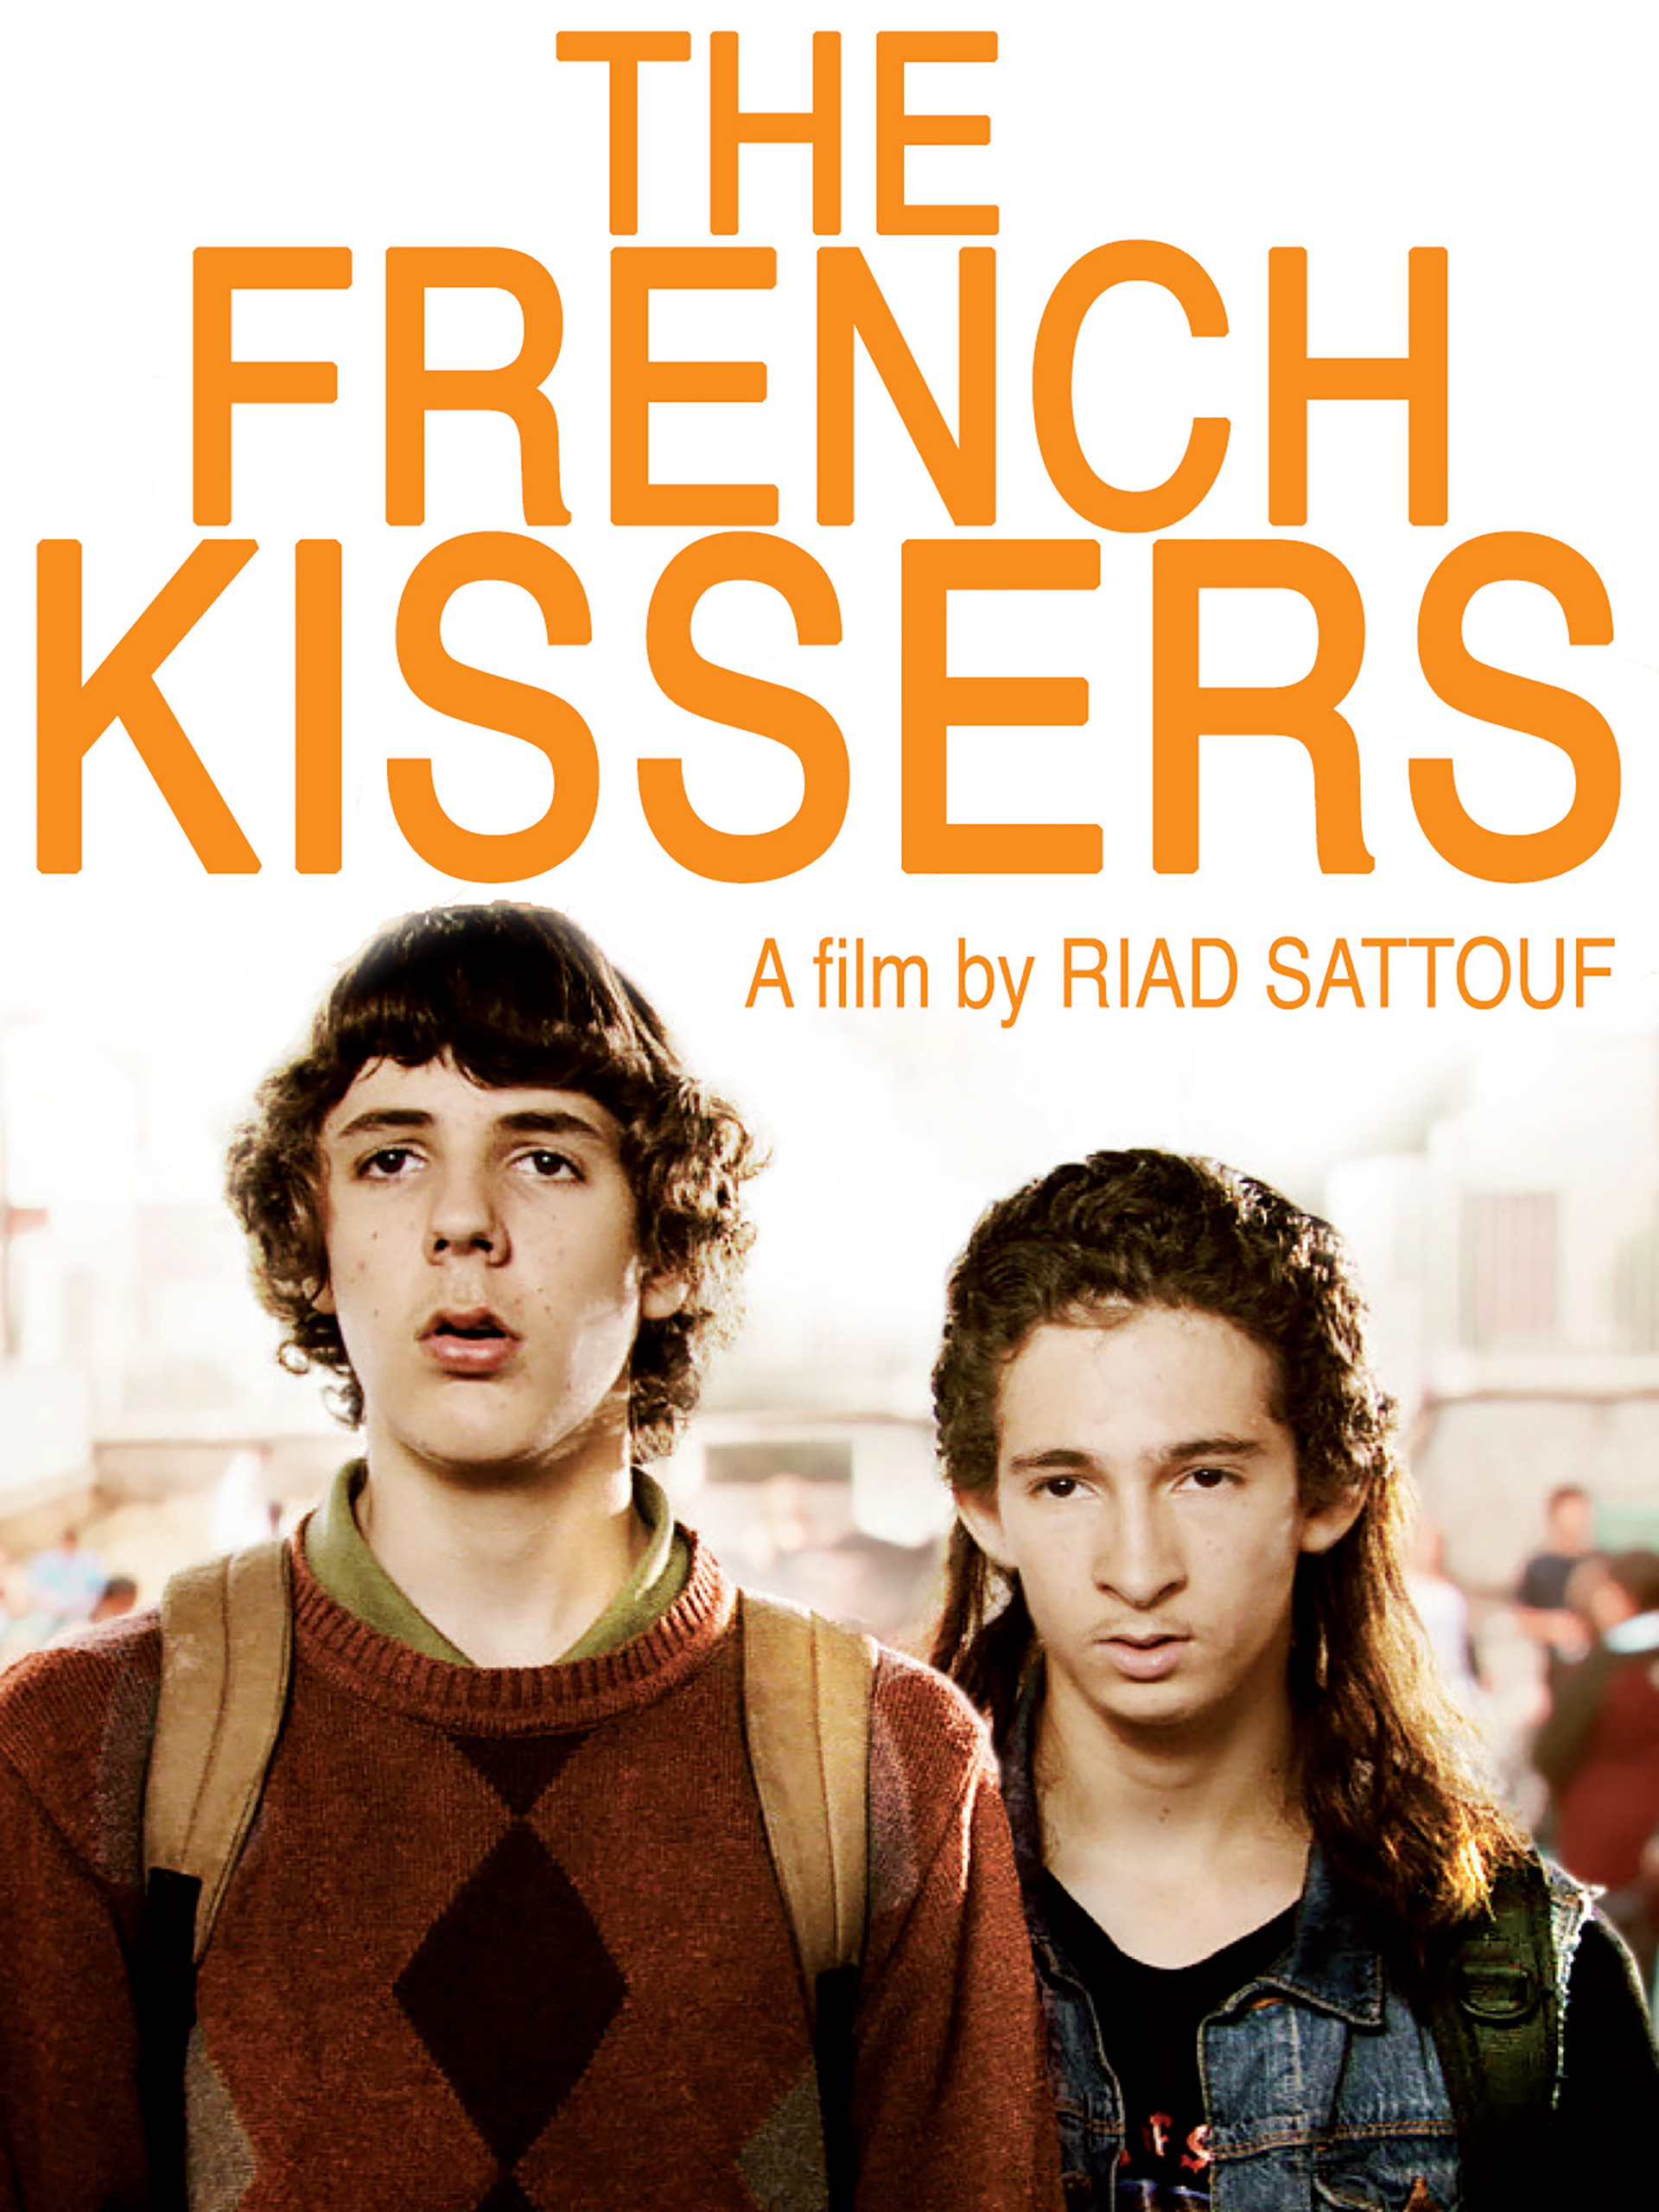 THE FRENCH KISSERS